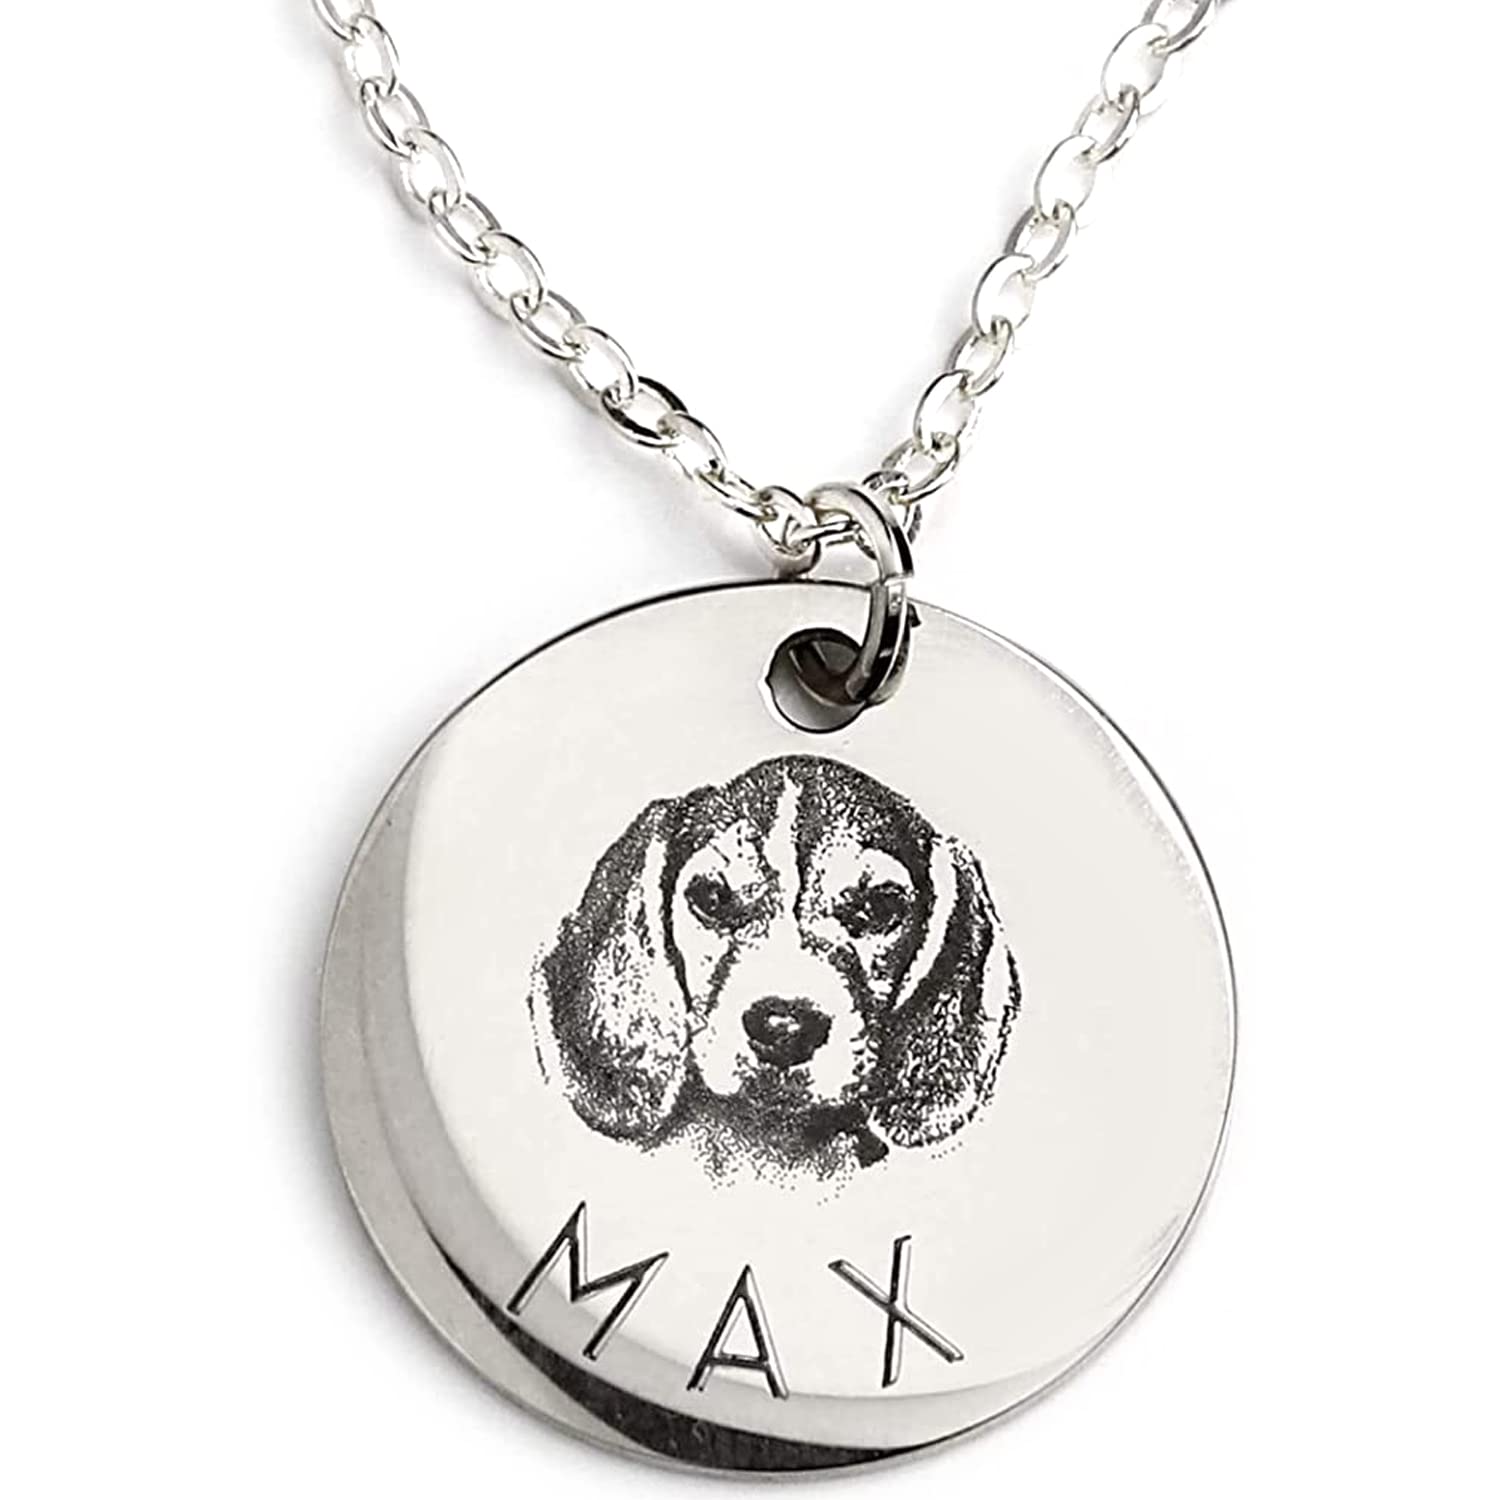 Personalized Pet Mom Gifts Custom Pet Jewelry Dog Necklace Cat Lovers Mothers Day Gift for Grandma from Daughter Custom Portrait Pet Memorial Gifts Unique Jewelry Gifts for Her - LCN-AP